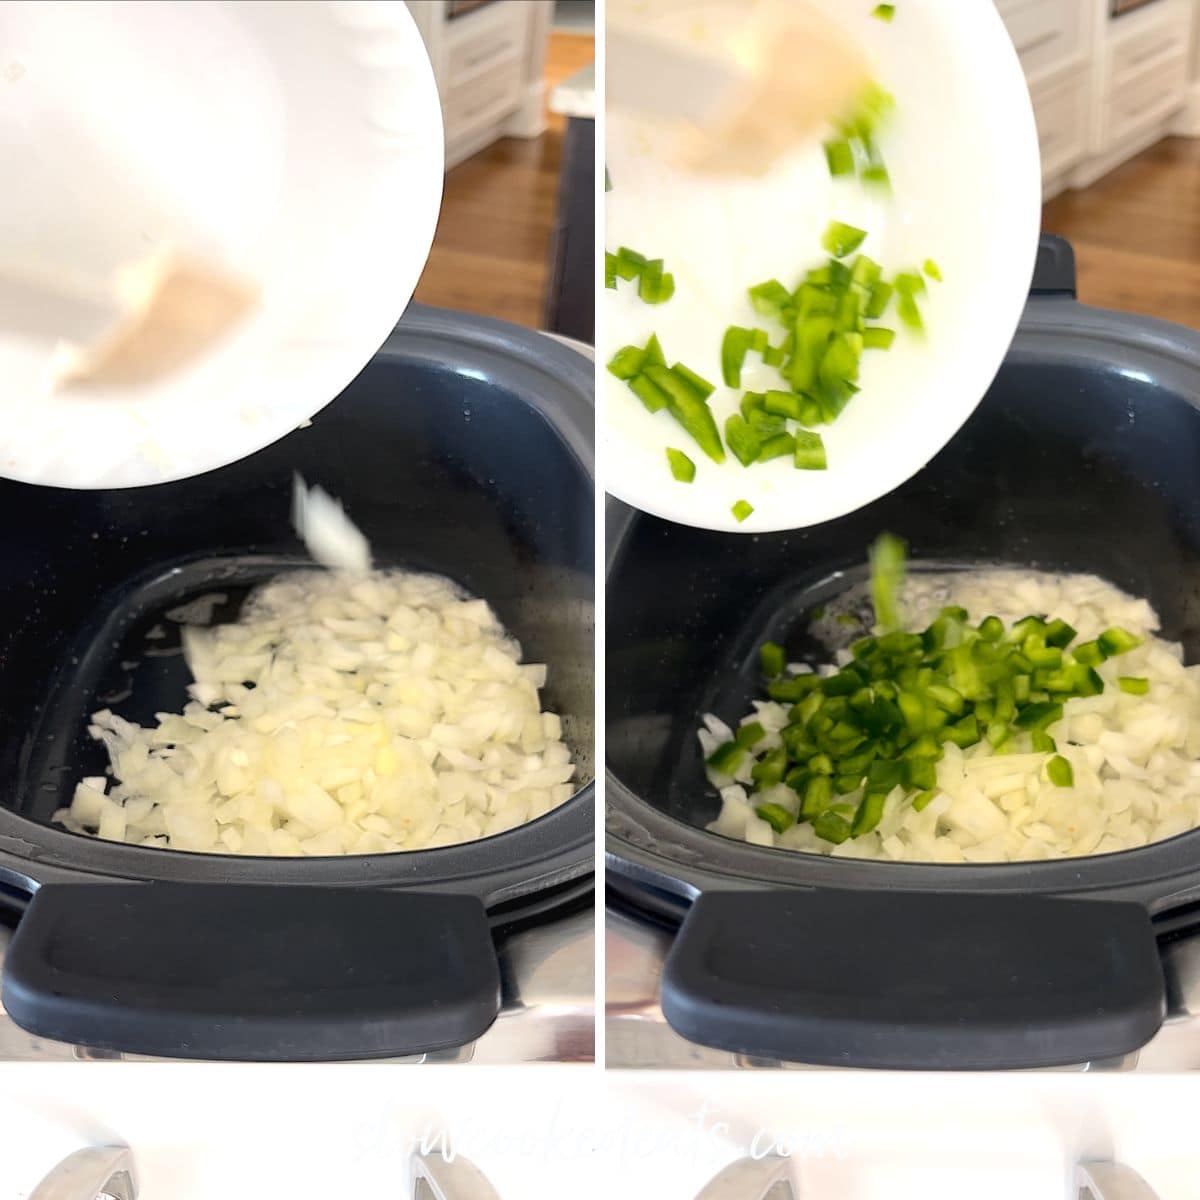 Adding onion and green pepper to a black oval crock pot.